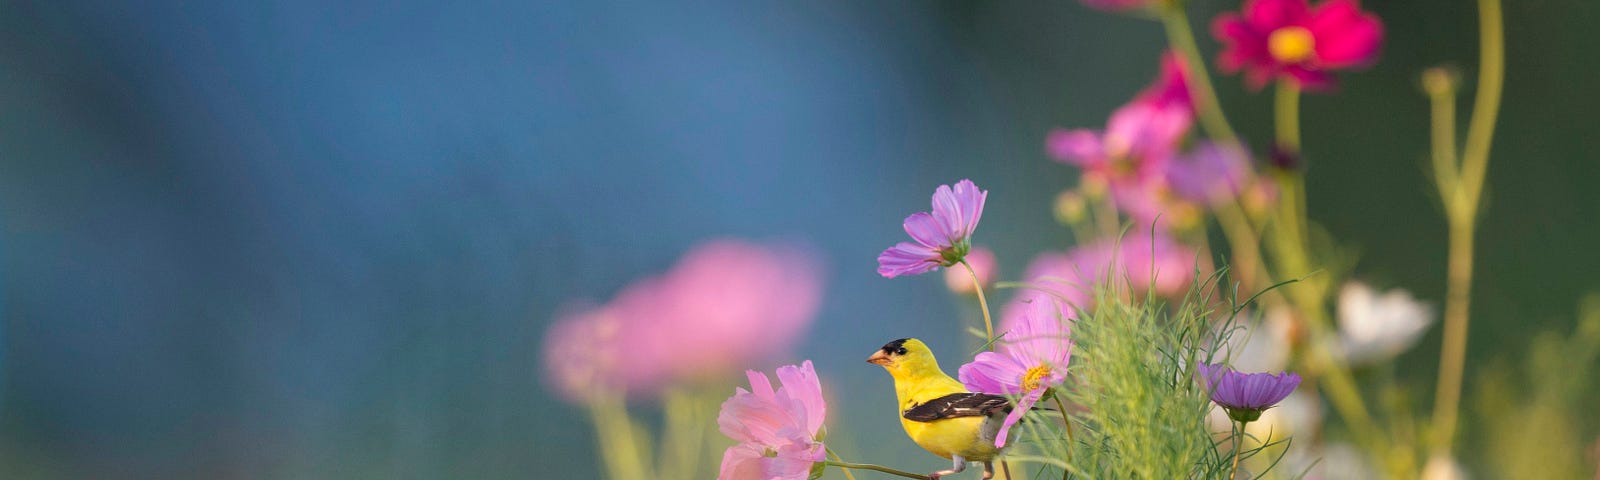 Goldfinch, a yellow bird with black on its head and wing, perched facing left on the stem of a purple flower in a meadow with purple and pink blooms. The goldfinch is New Jersey’s state bird.